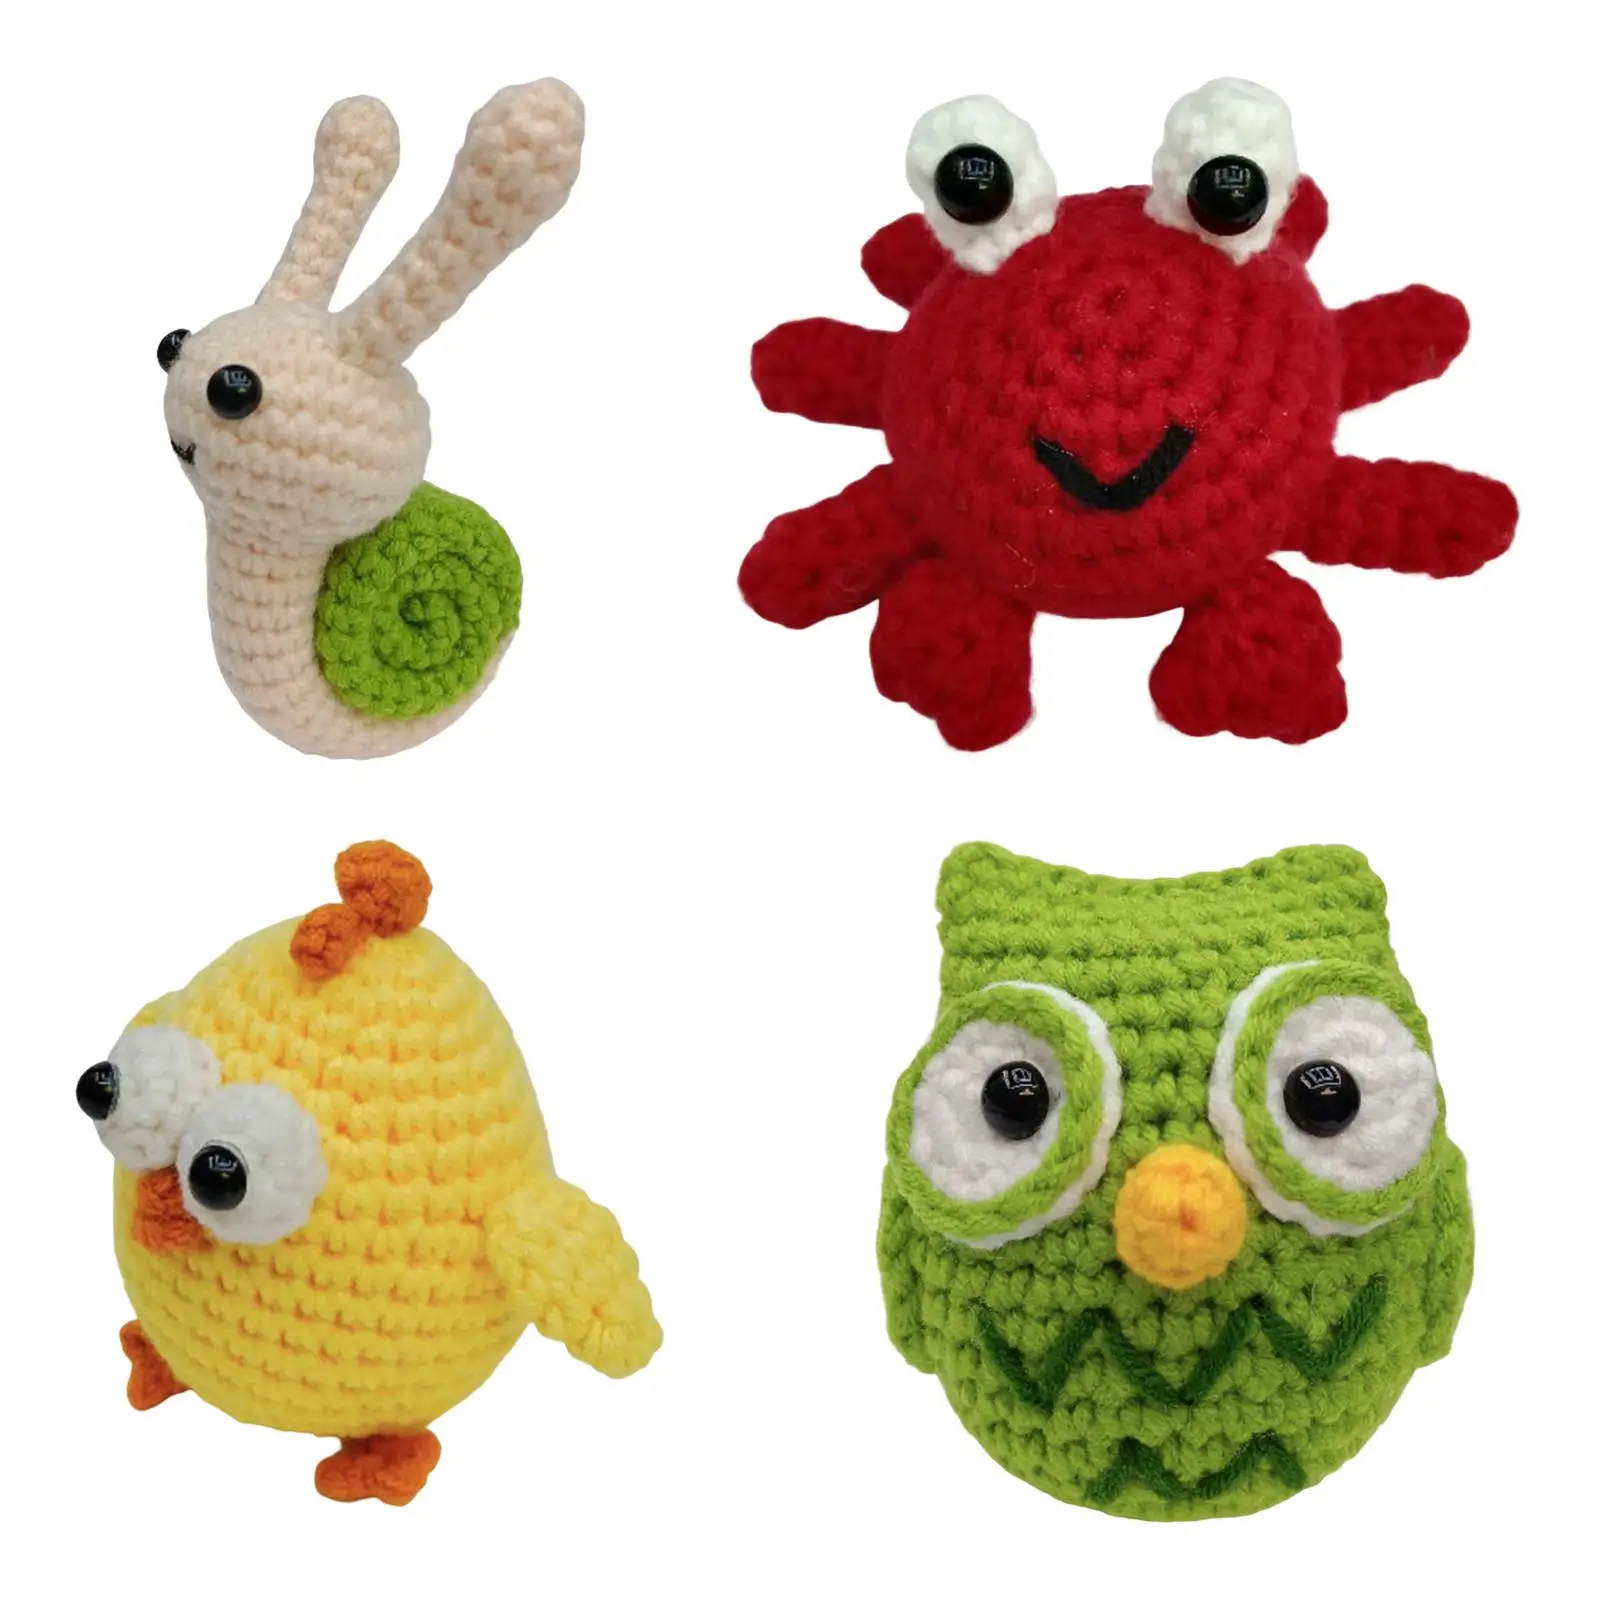 Handmade DIY Crochet Make Your Own Doll Crocheting Craft Starter Pack Includes Yarn, Hook Cute Animal for Adults and Kids